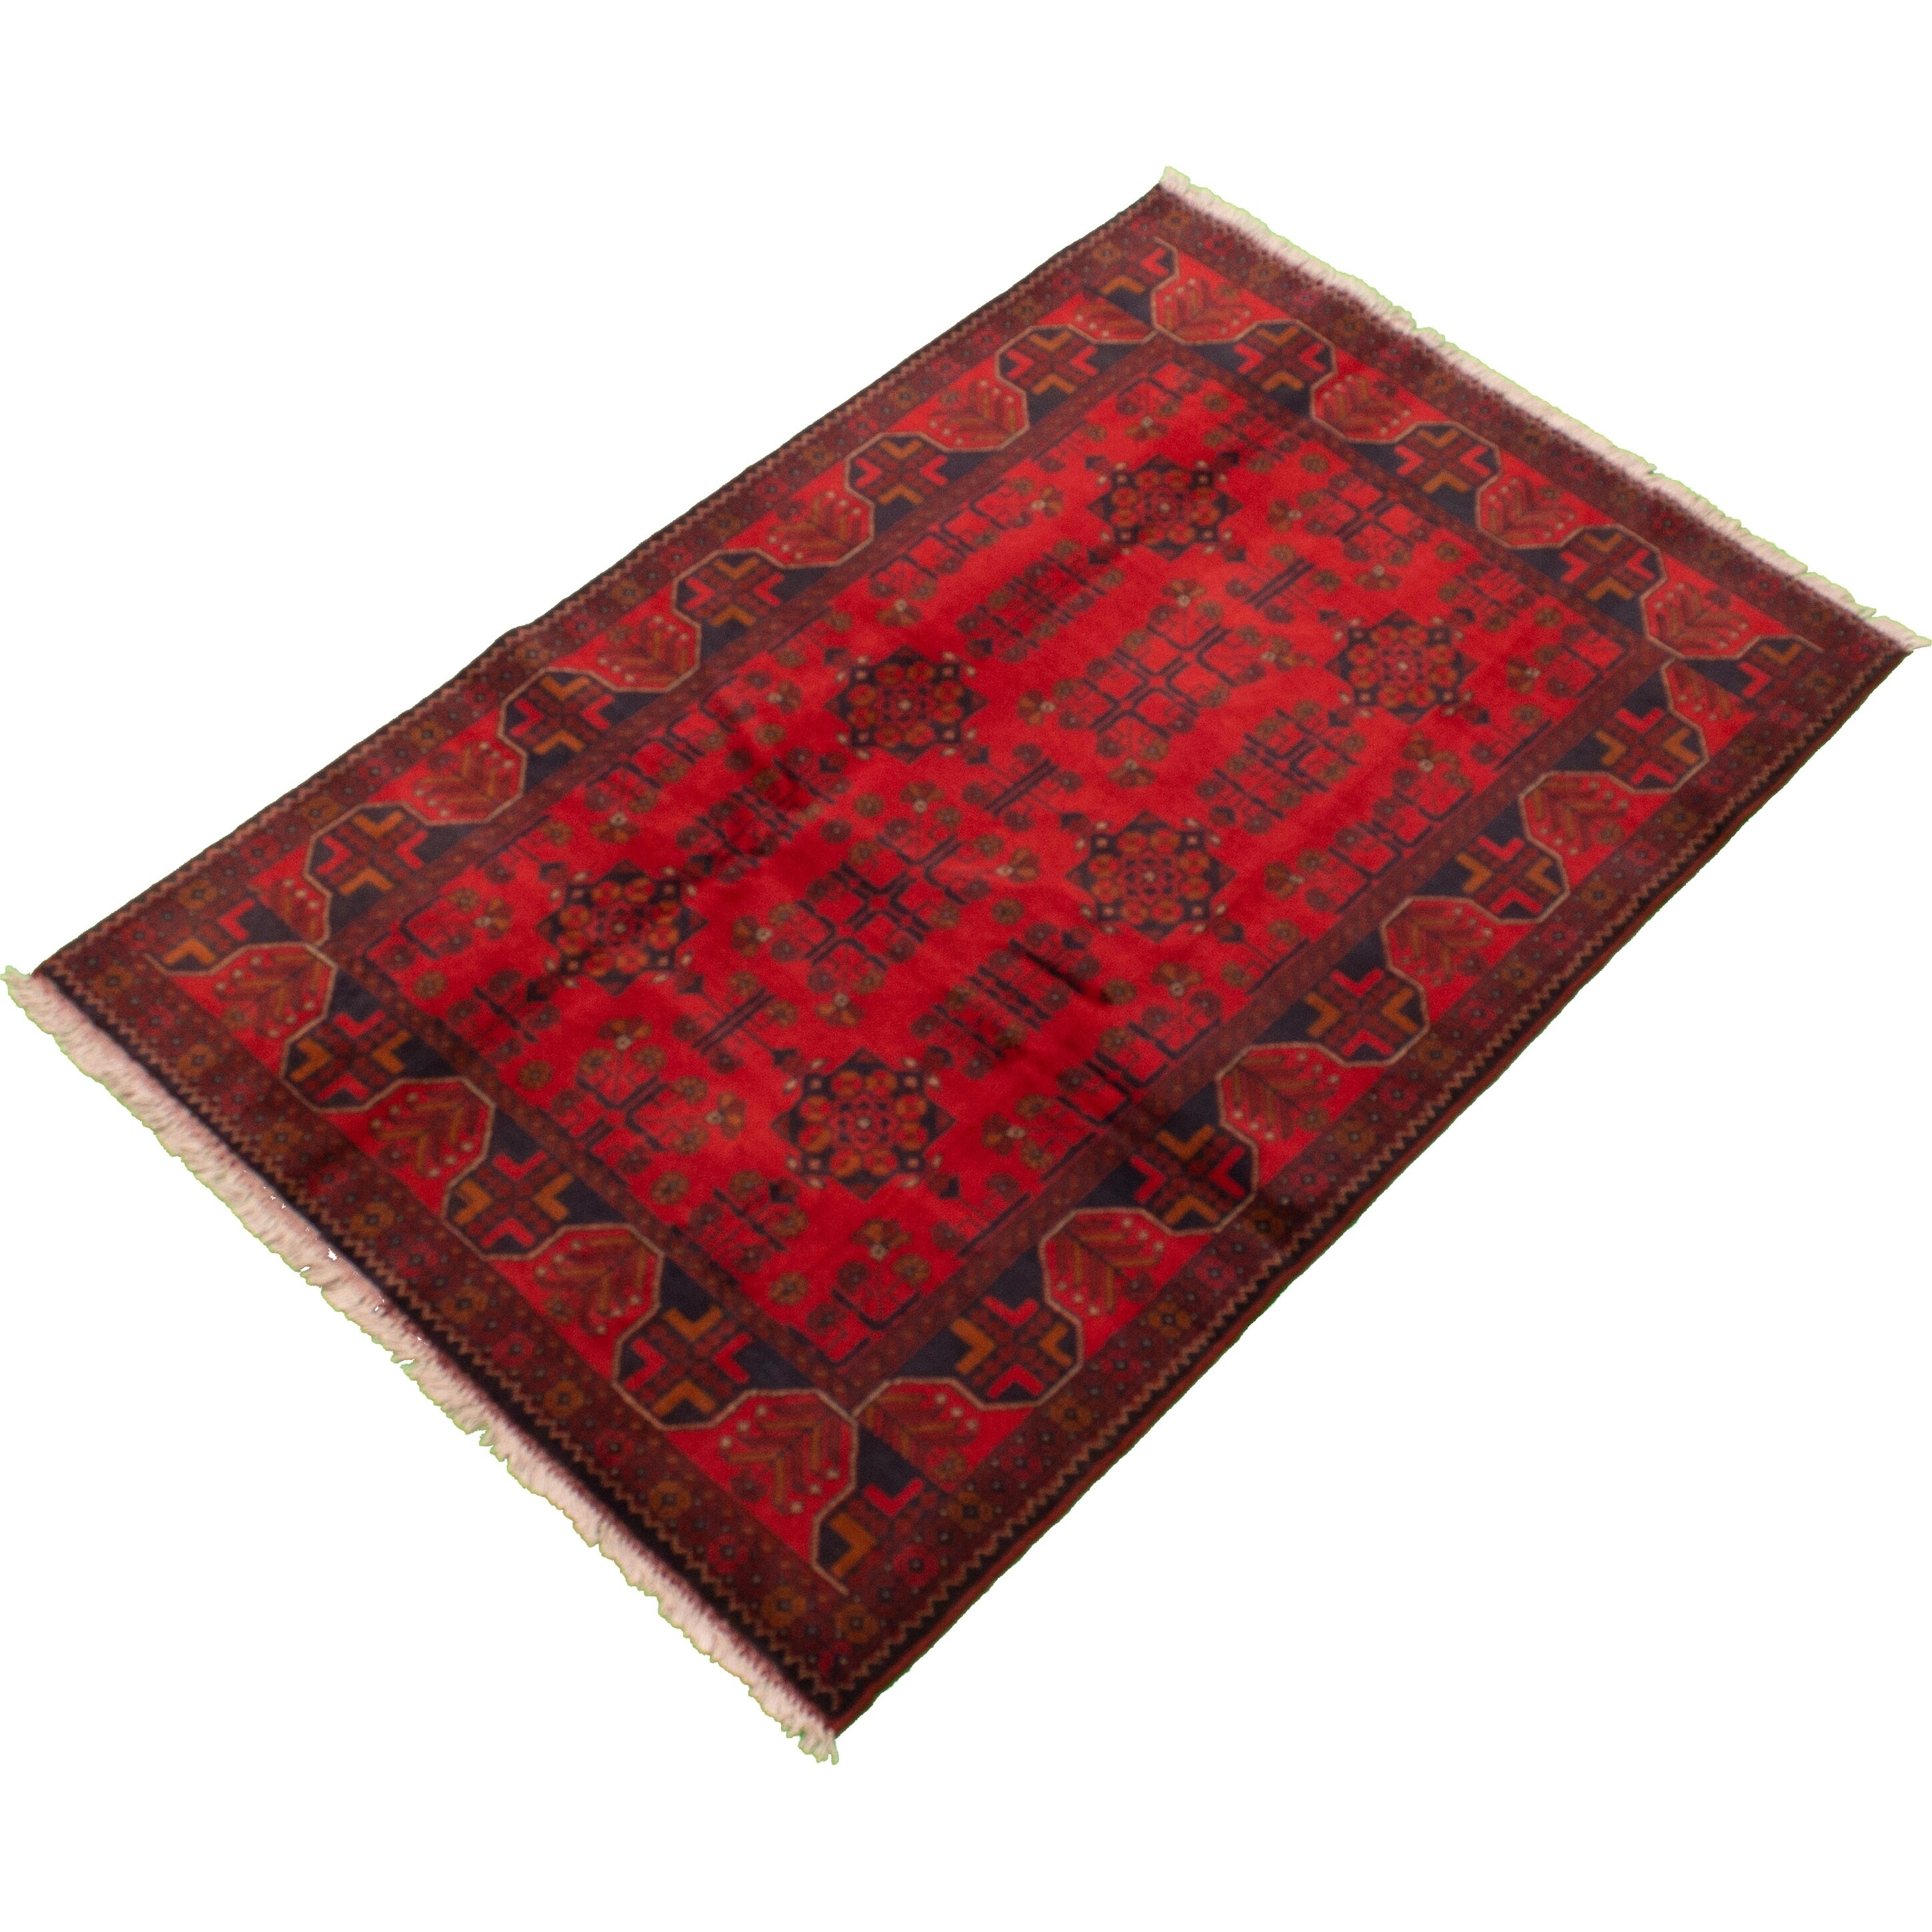 Hand-Knotted Wool Rug Bedroom 347750 Finest Khal Mohammadi Bordered Red Rug 6'5 x 9'10 eCarpet Gallery Large Area Rug for Living Room 